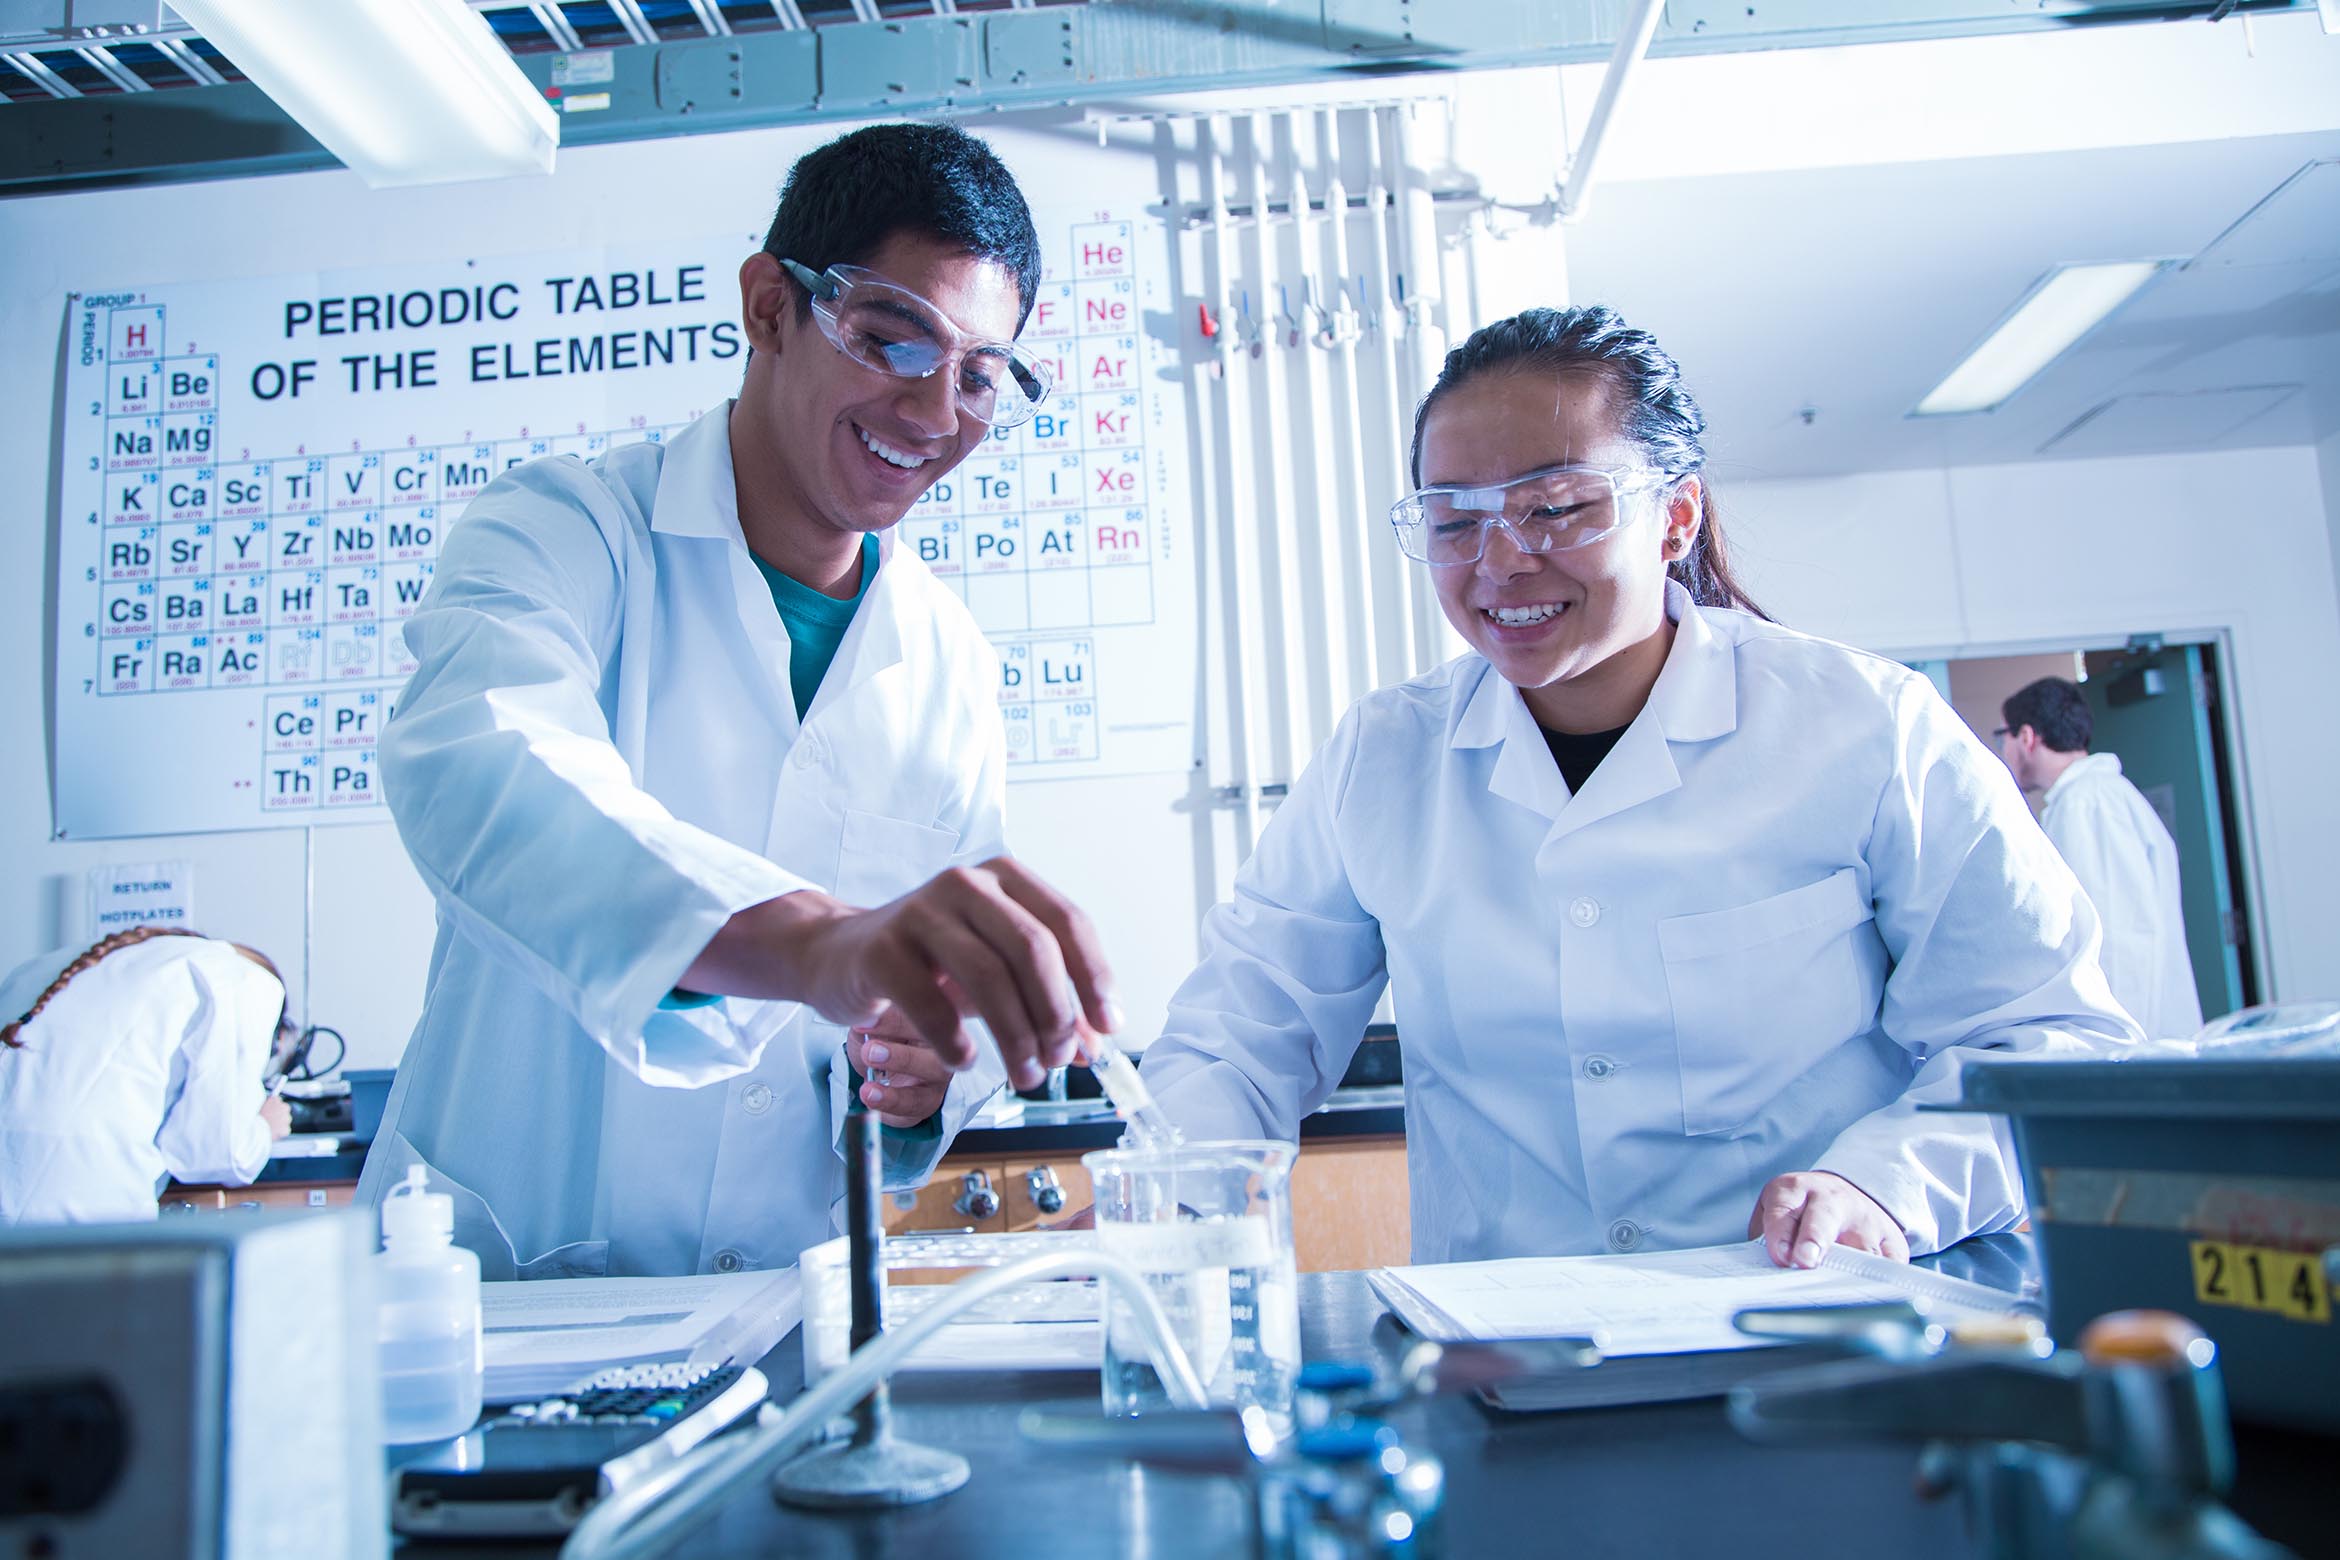 This is an image of two students doing chemistry research in a lab.